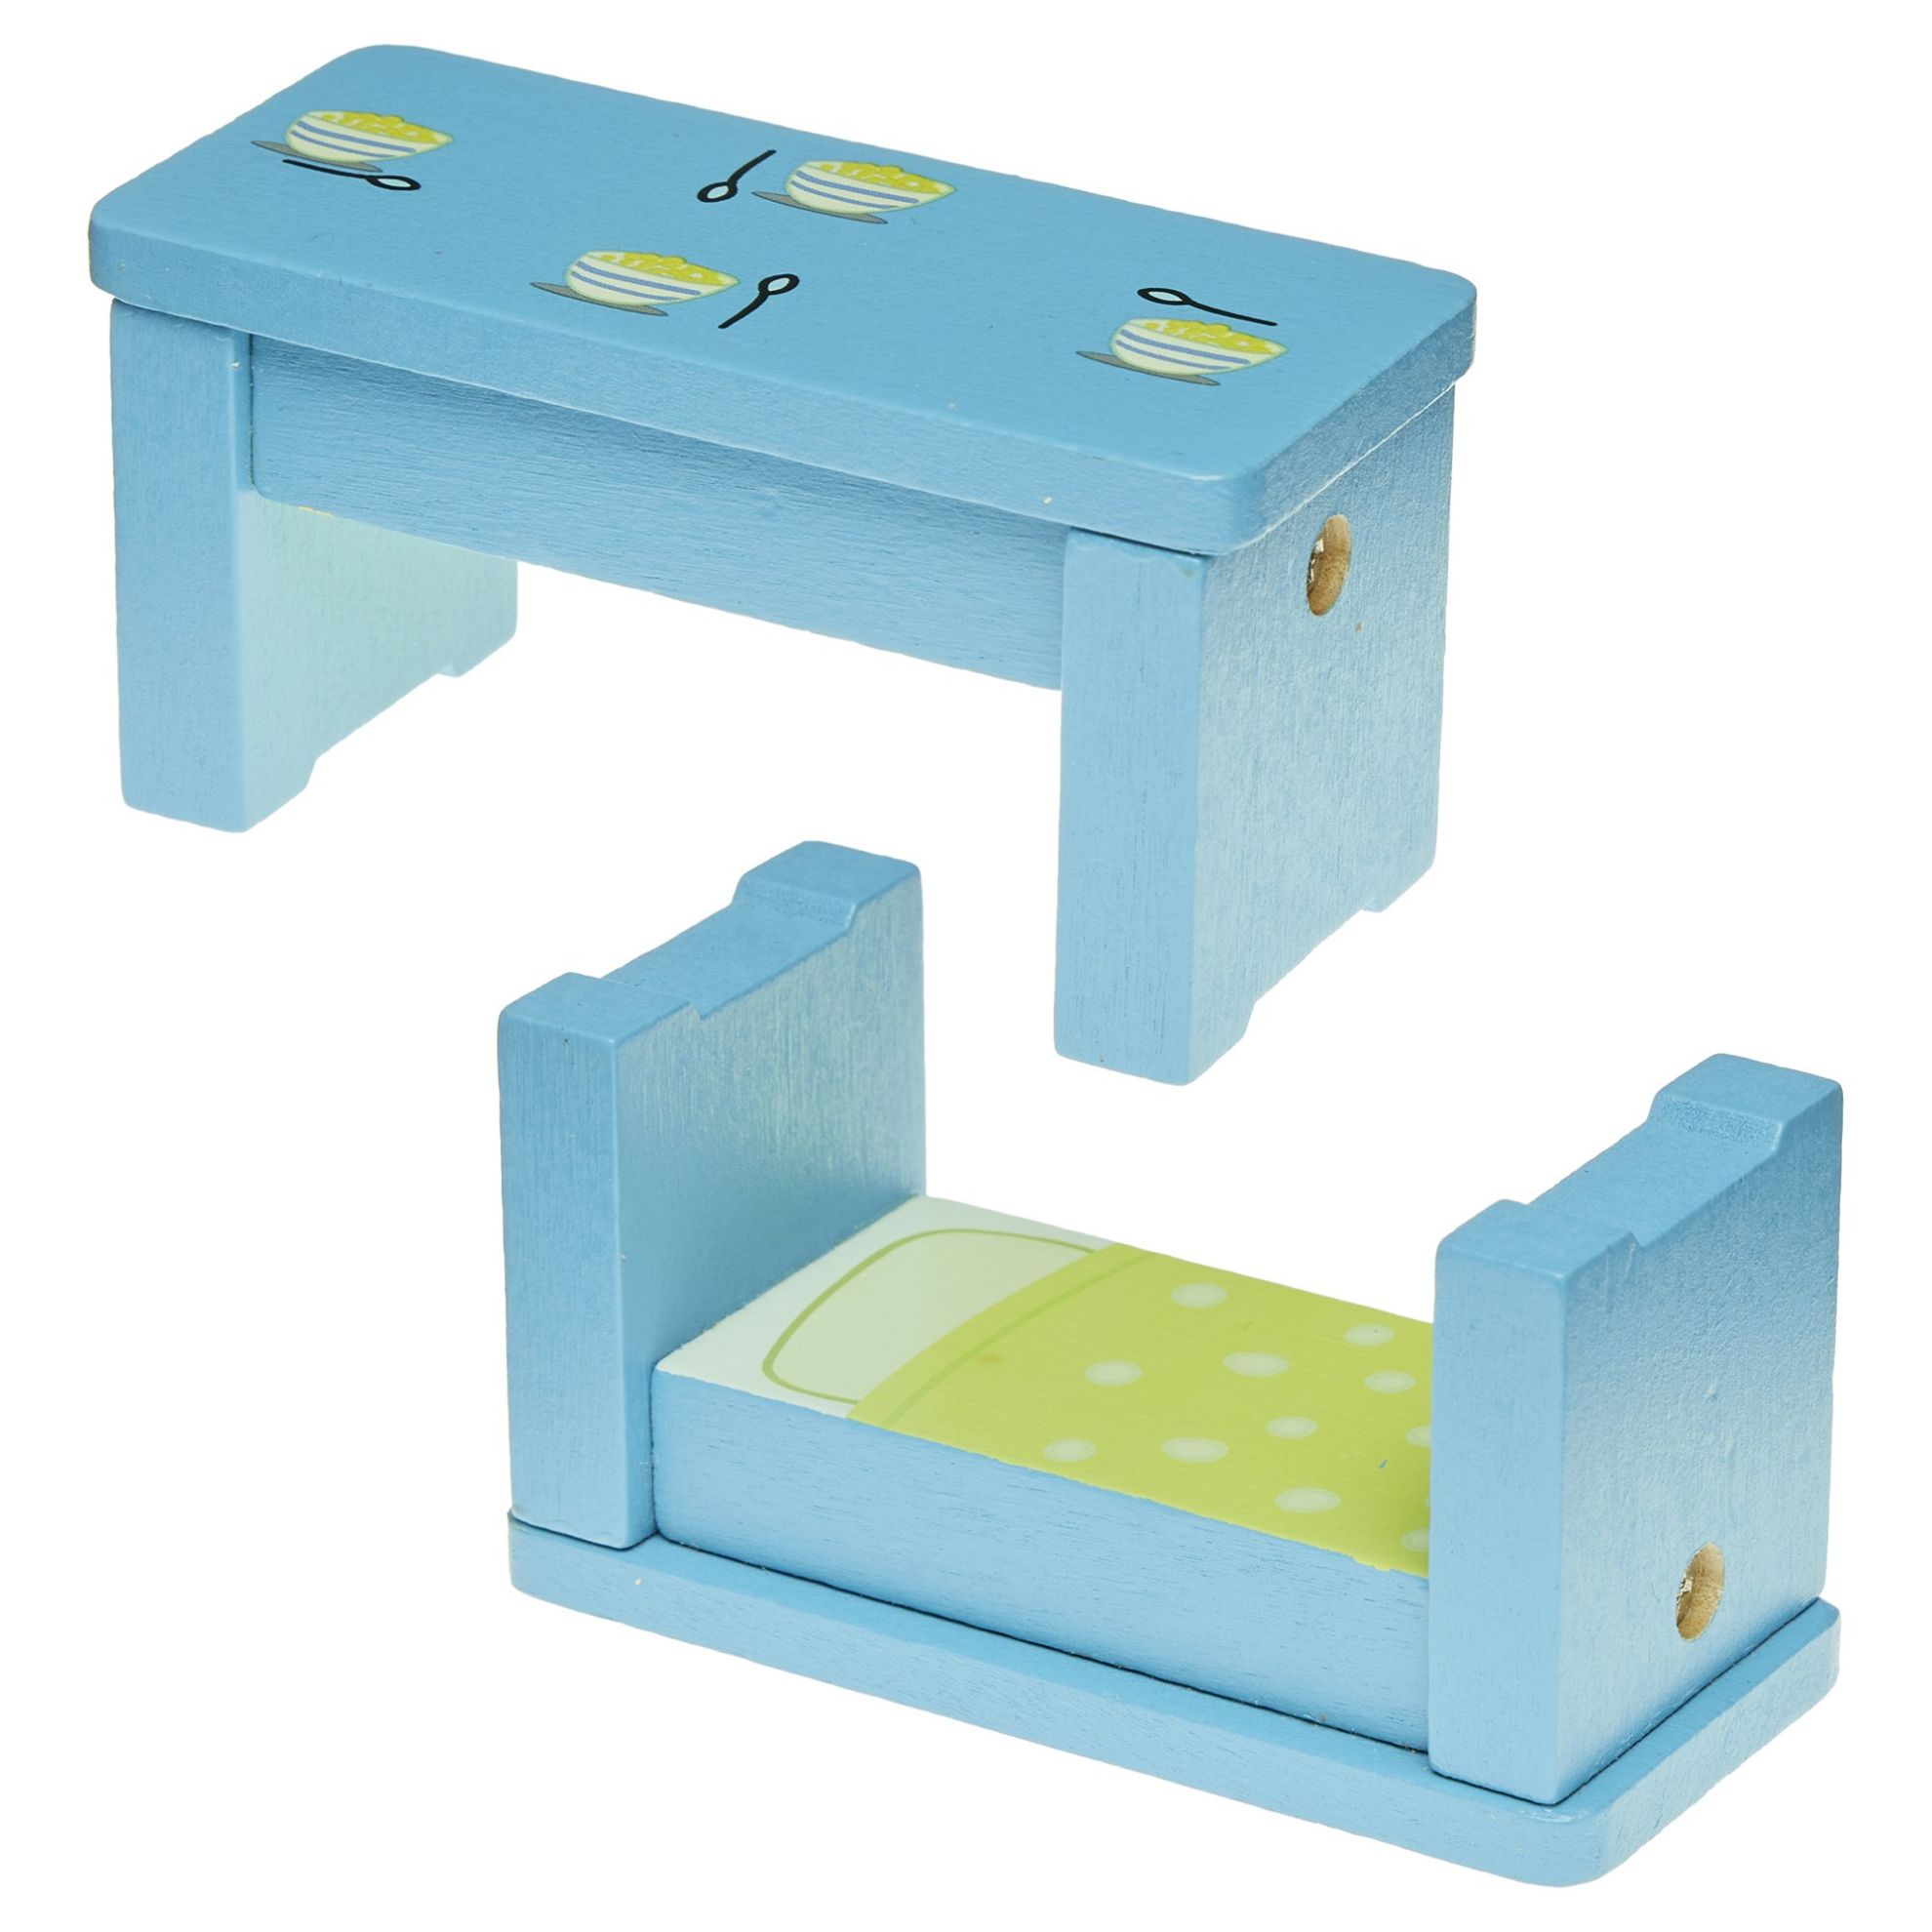 Spare Parts - Peppa Pig's Wooden Family Home - Reversible Dining Table/Bed